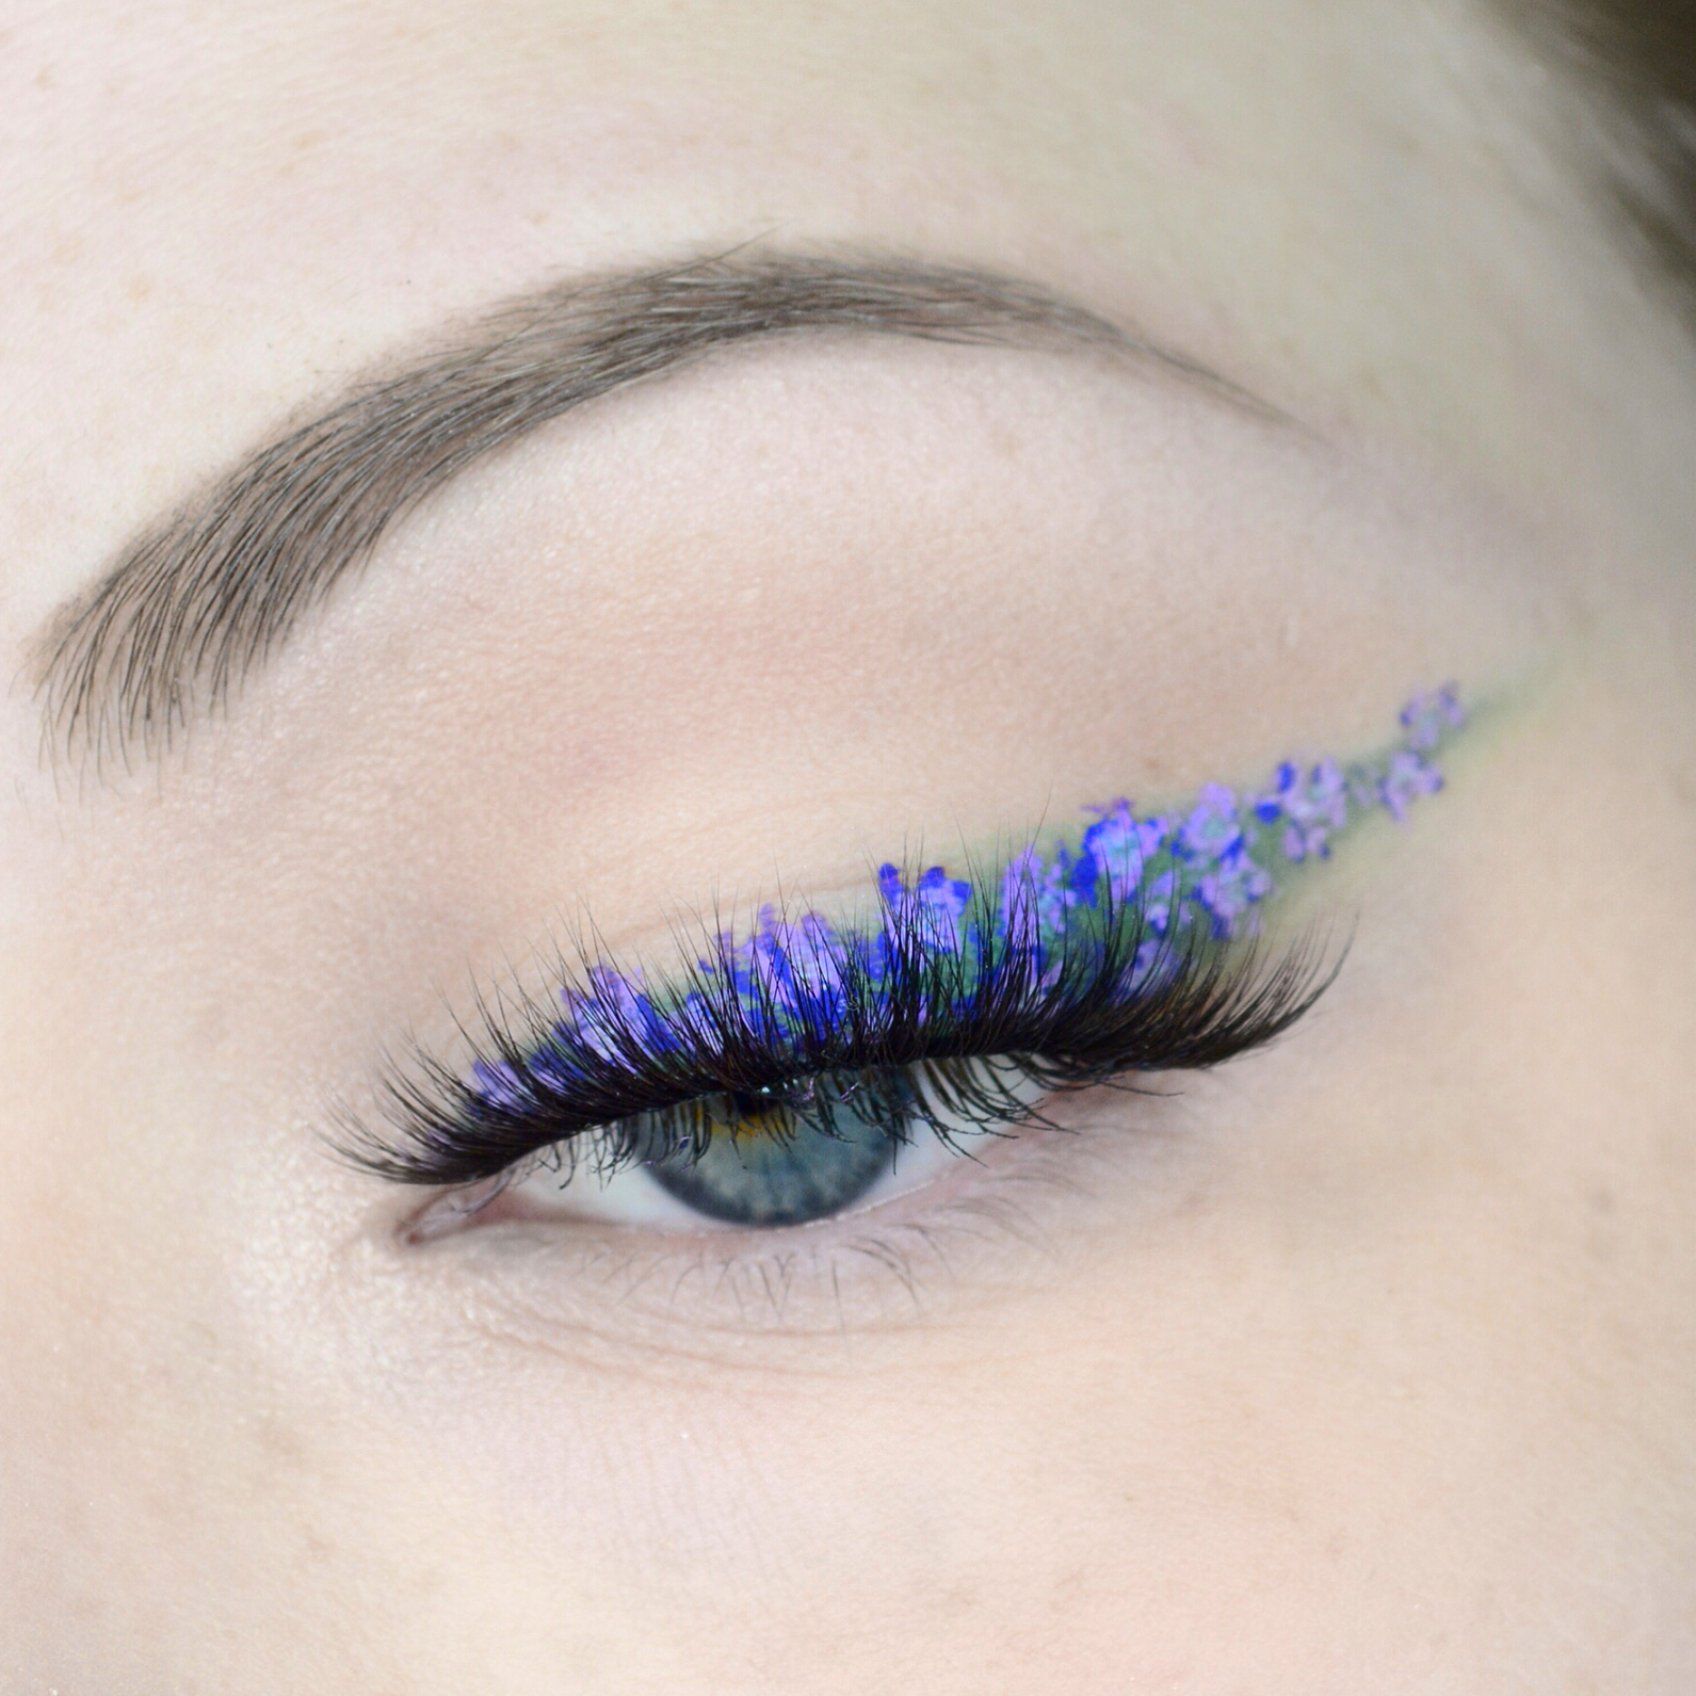 A close up of a person with long eyelashes and flowers